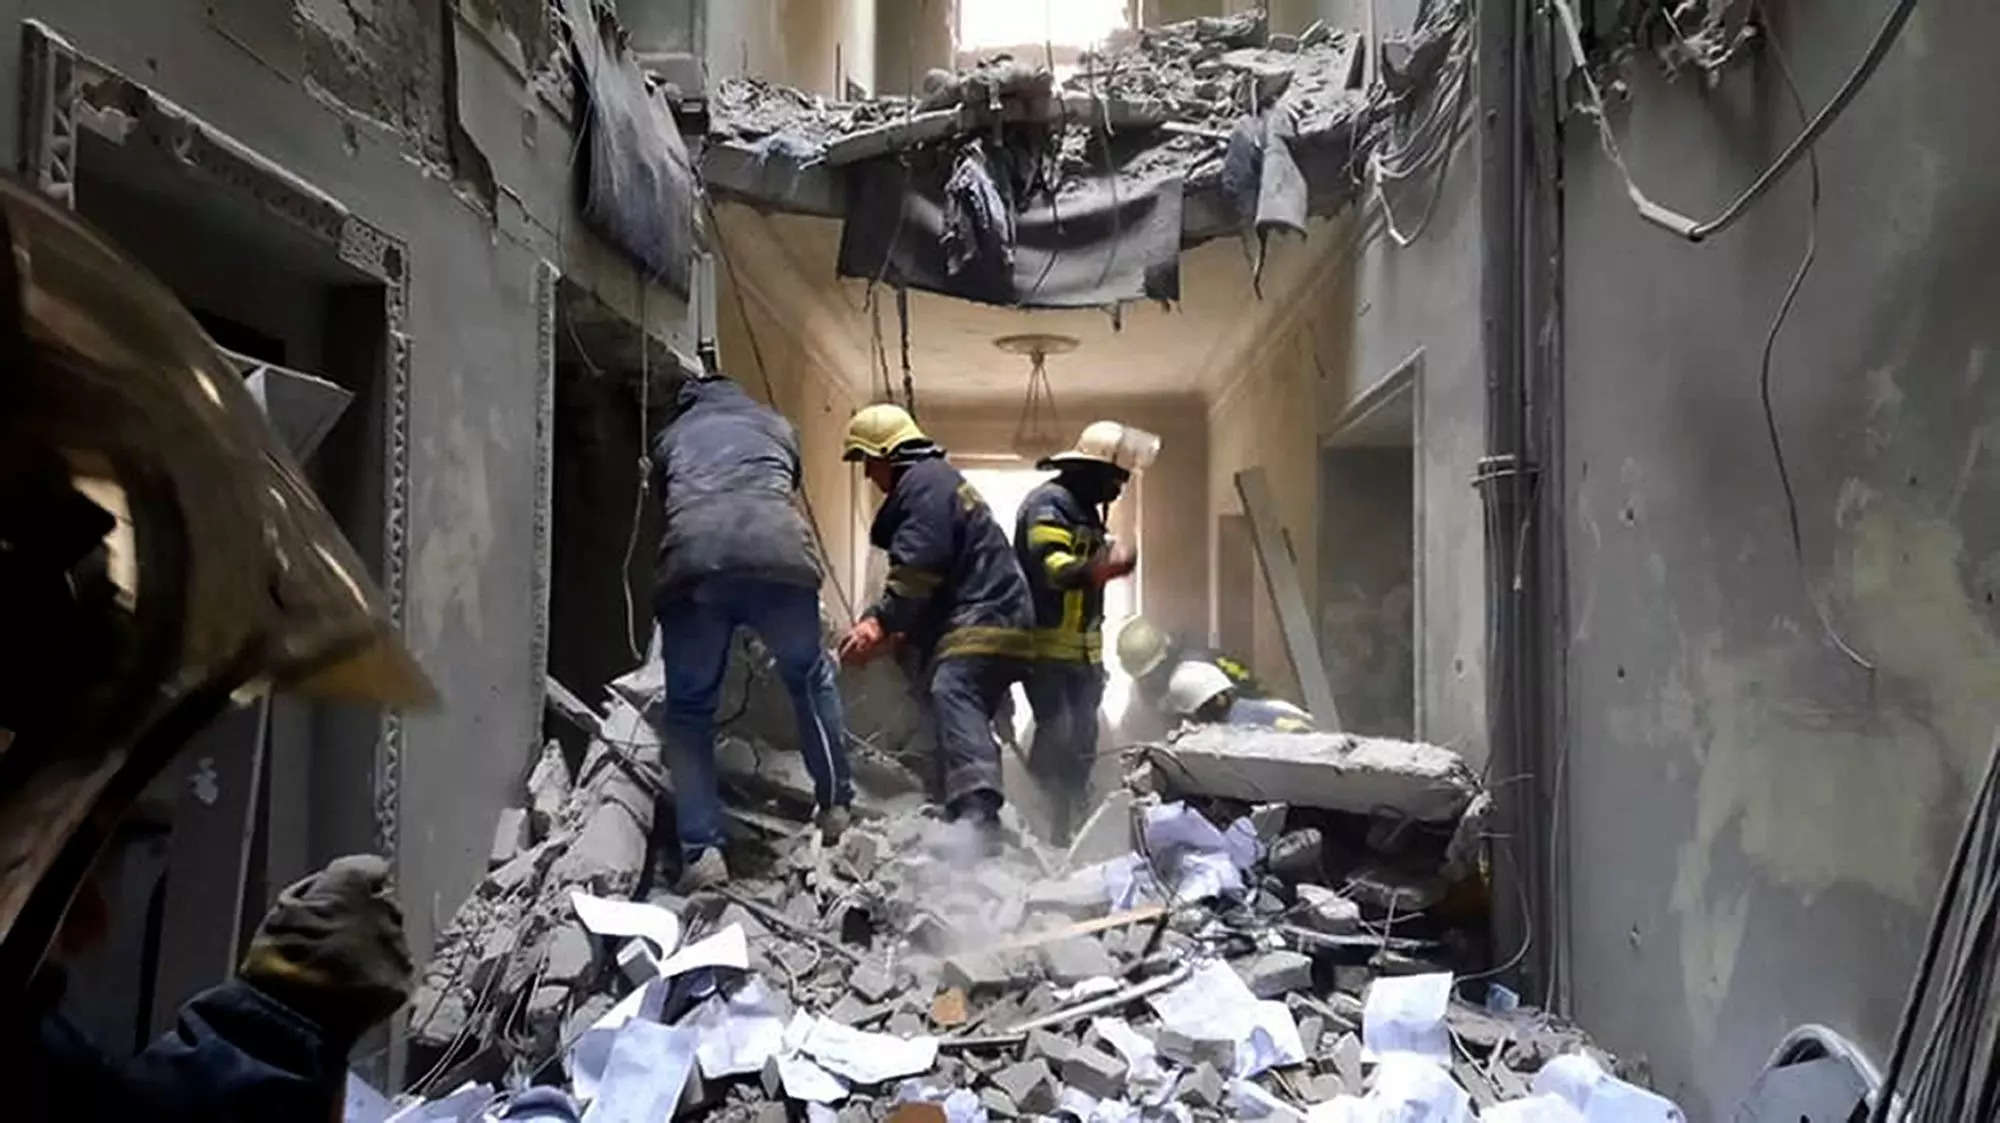 Emergency workers sort through rubble